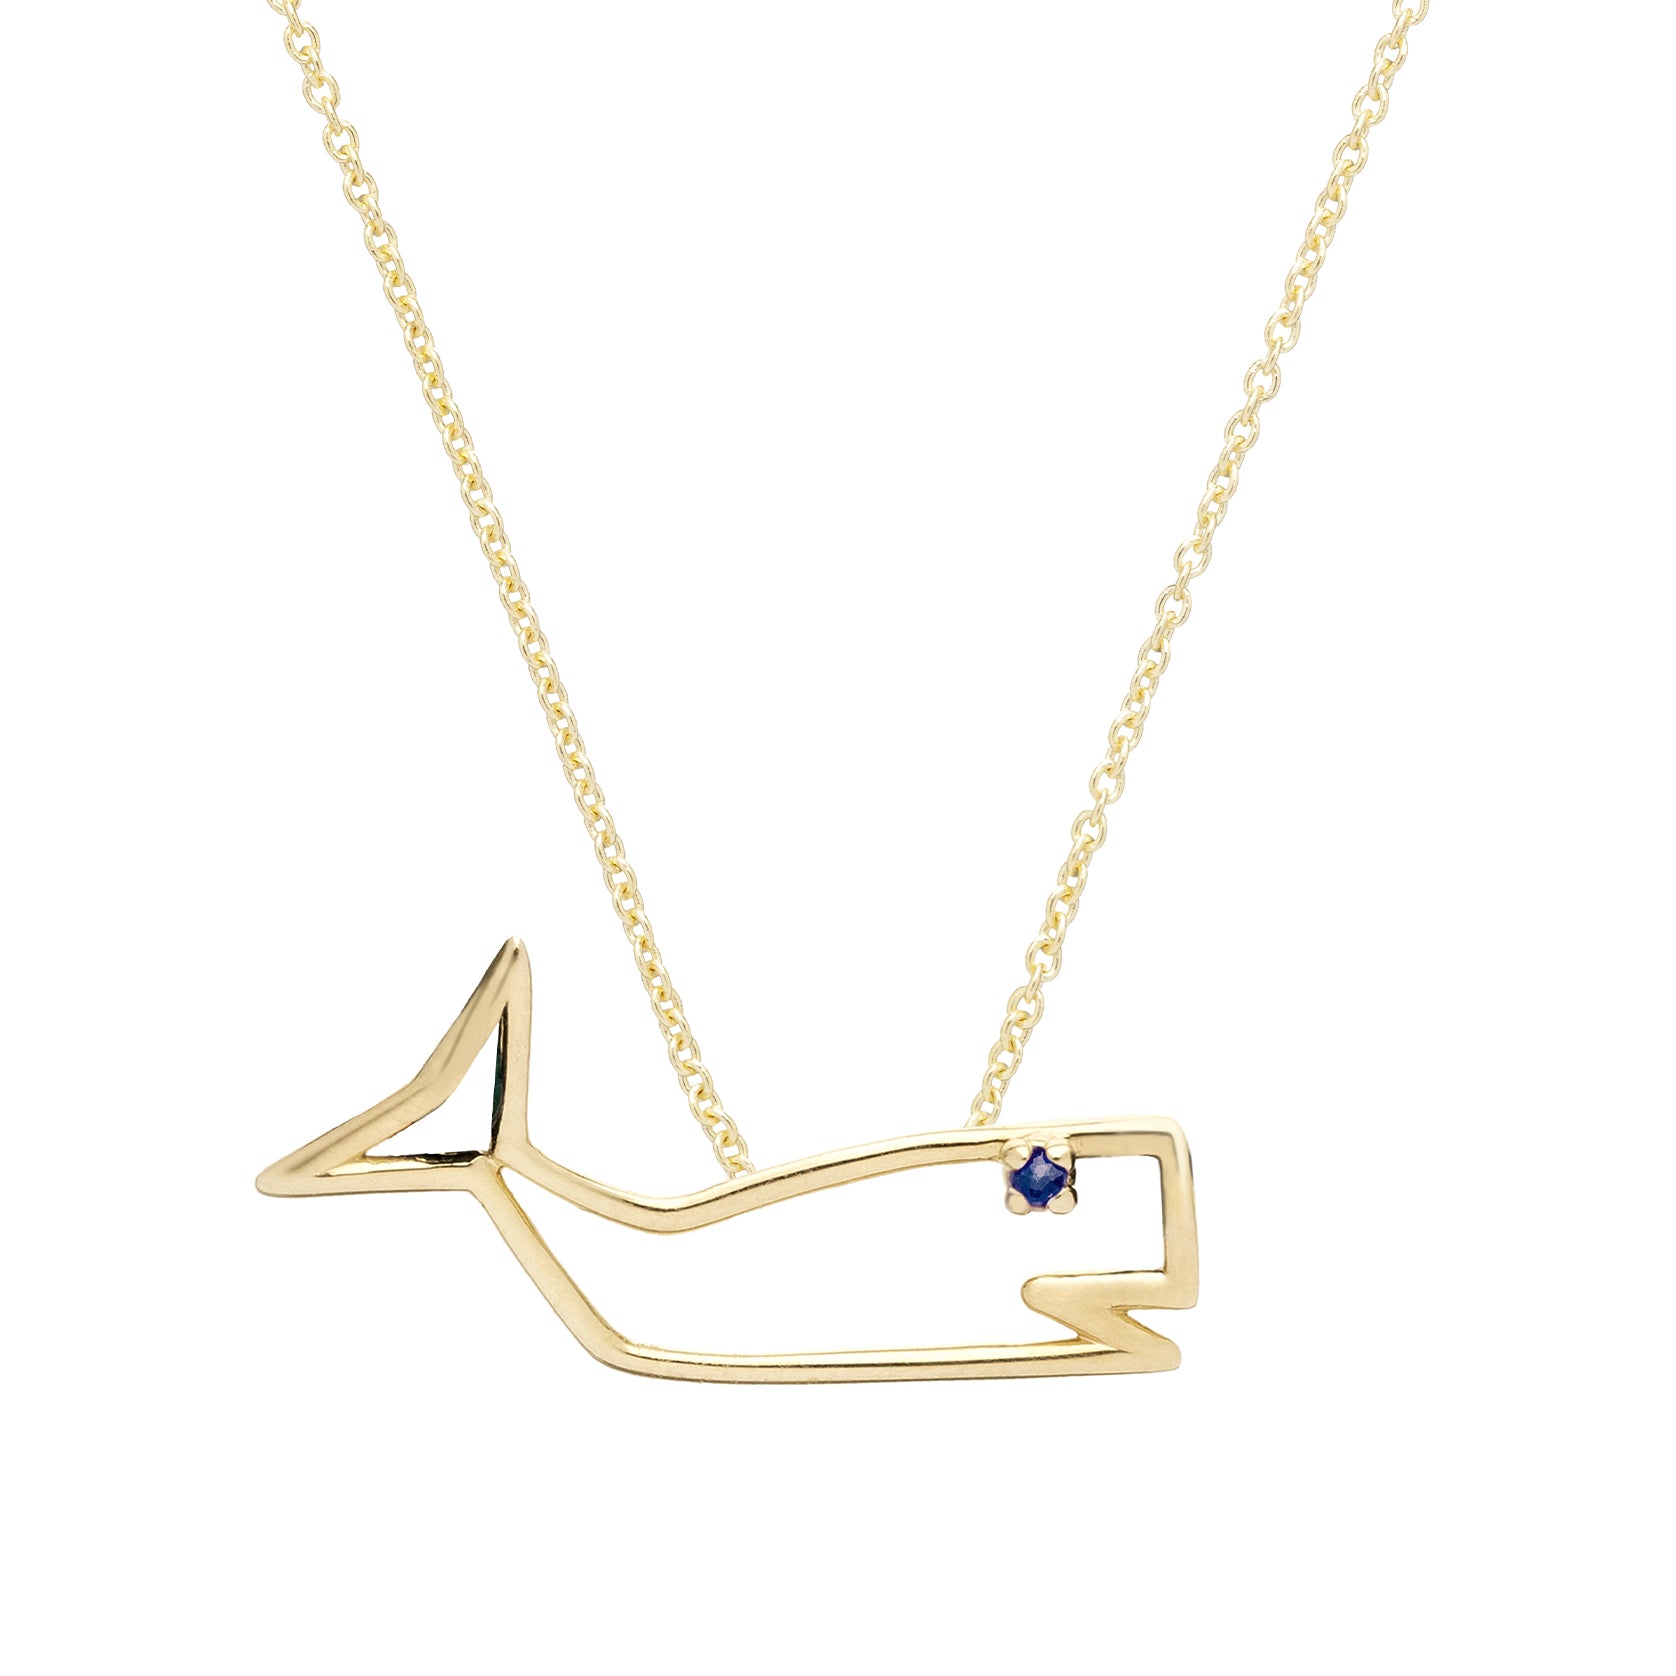 Gold chain necklace with a whale shaped pendant with a blue sapphire as eye